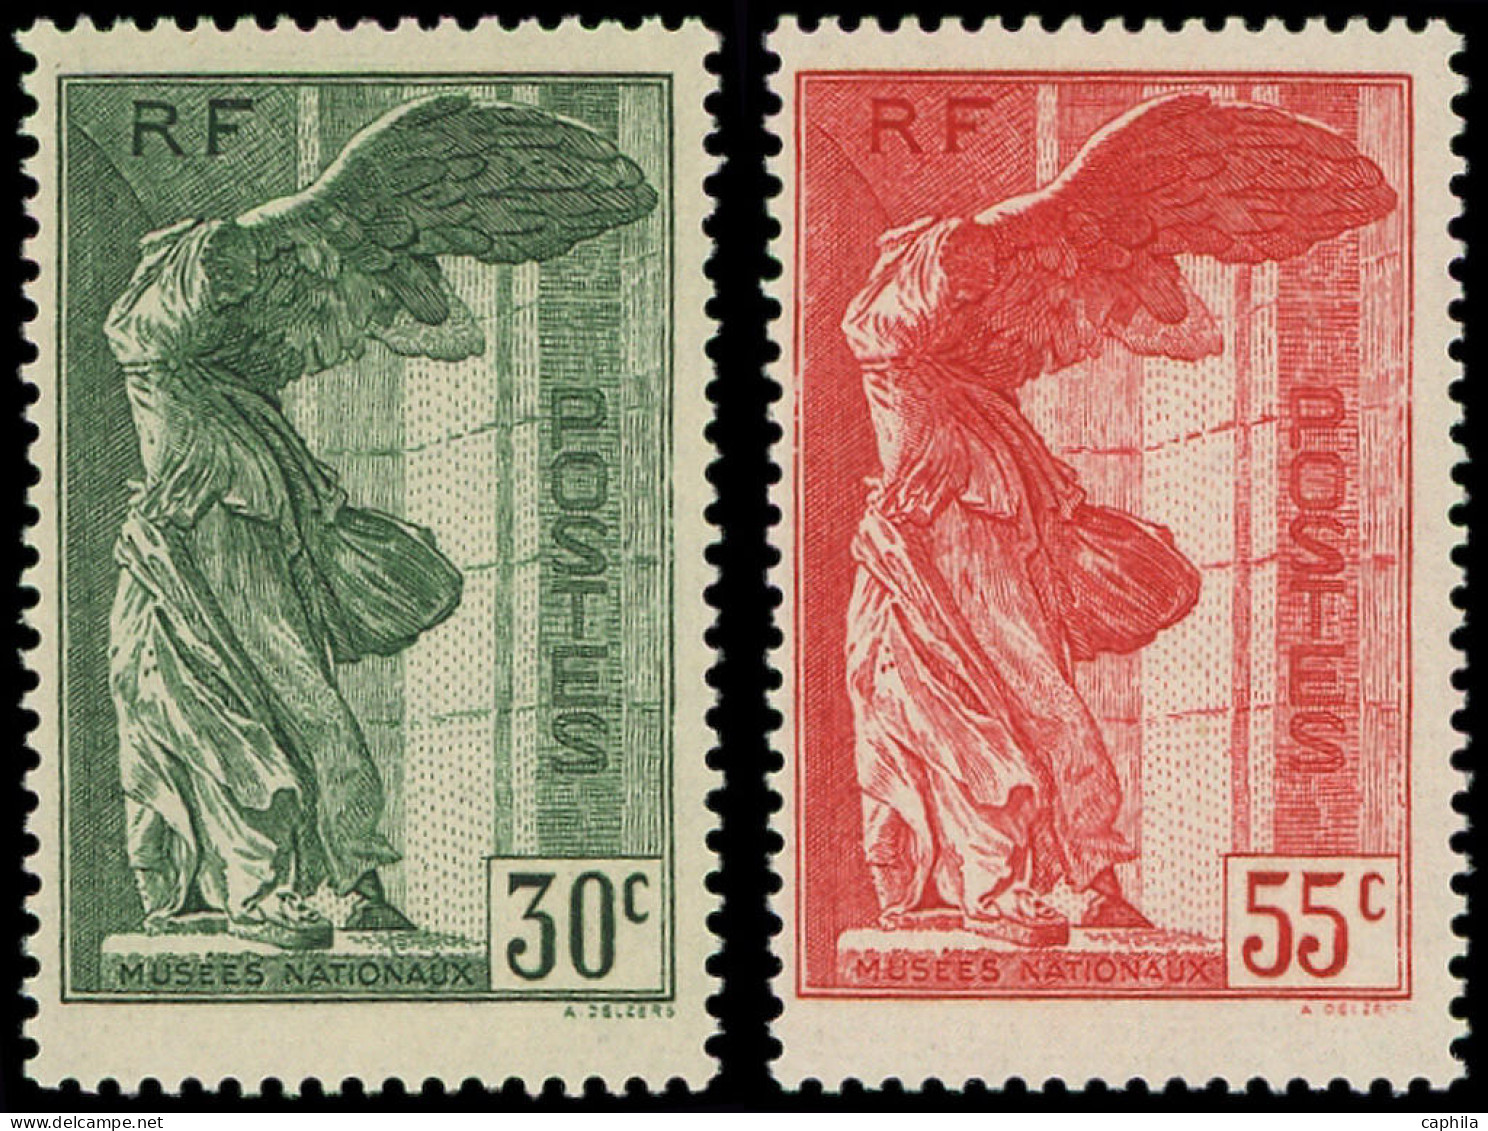 ** FRANCE - Poste - 354/55, Paire Samothrace - Unused Stamps